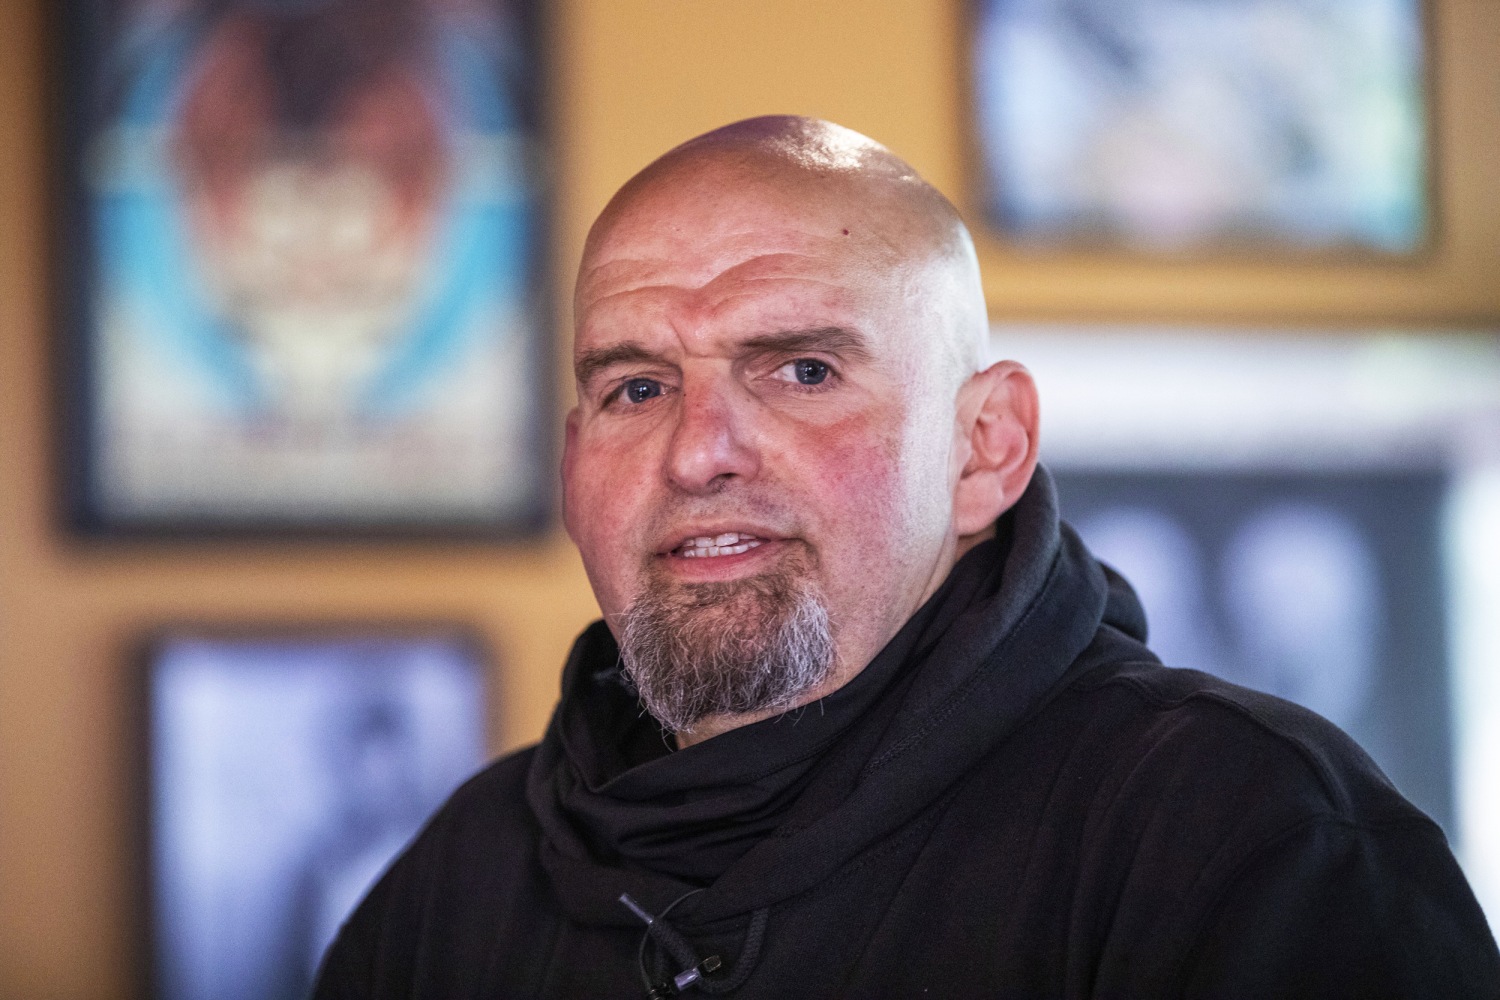 Pennsylvania Lt. Governor John Fetterman to return to in-person campaign after recovering from stroke